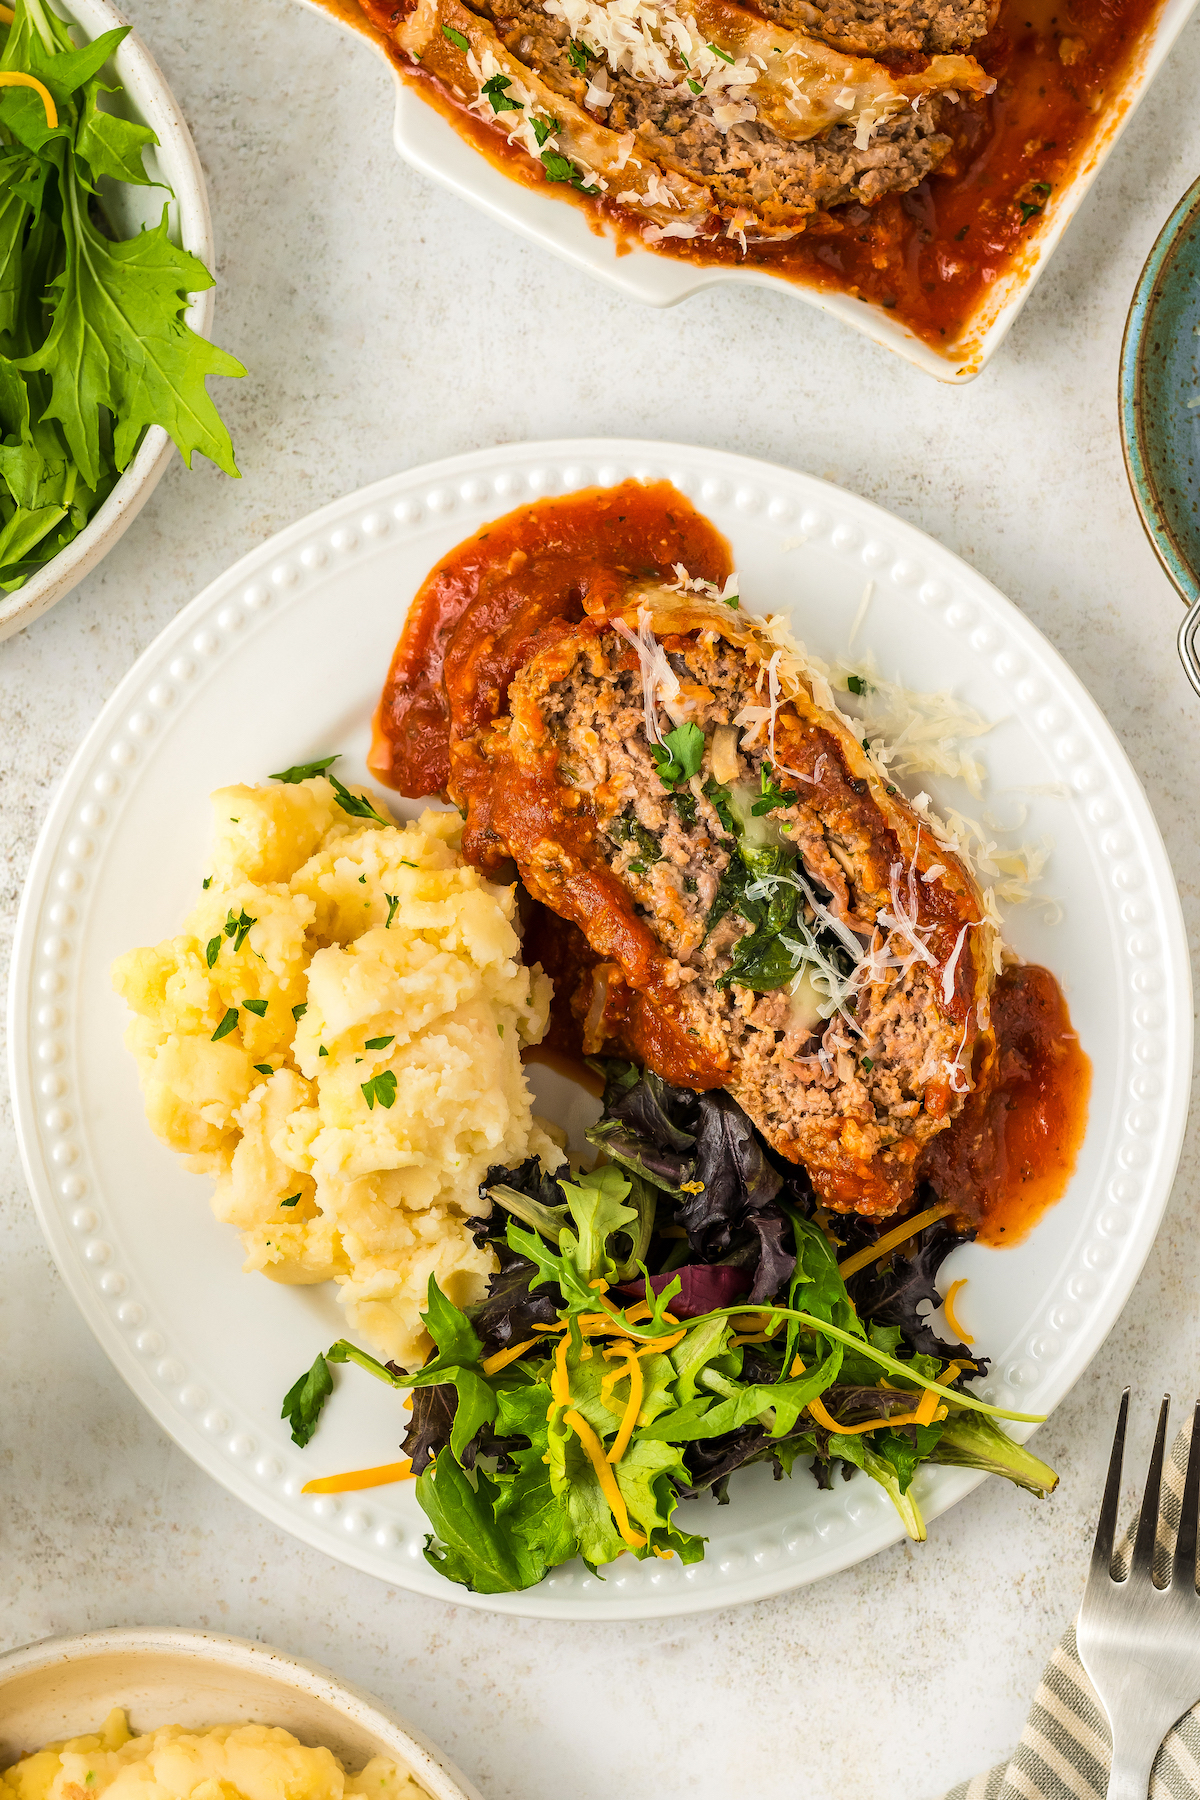 Italian meatloaf on a plate with a side of green salad and mashed potatoes.